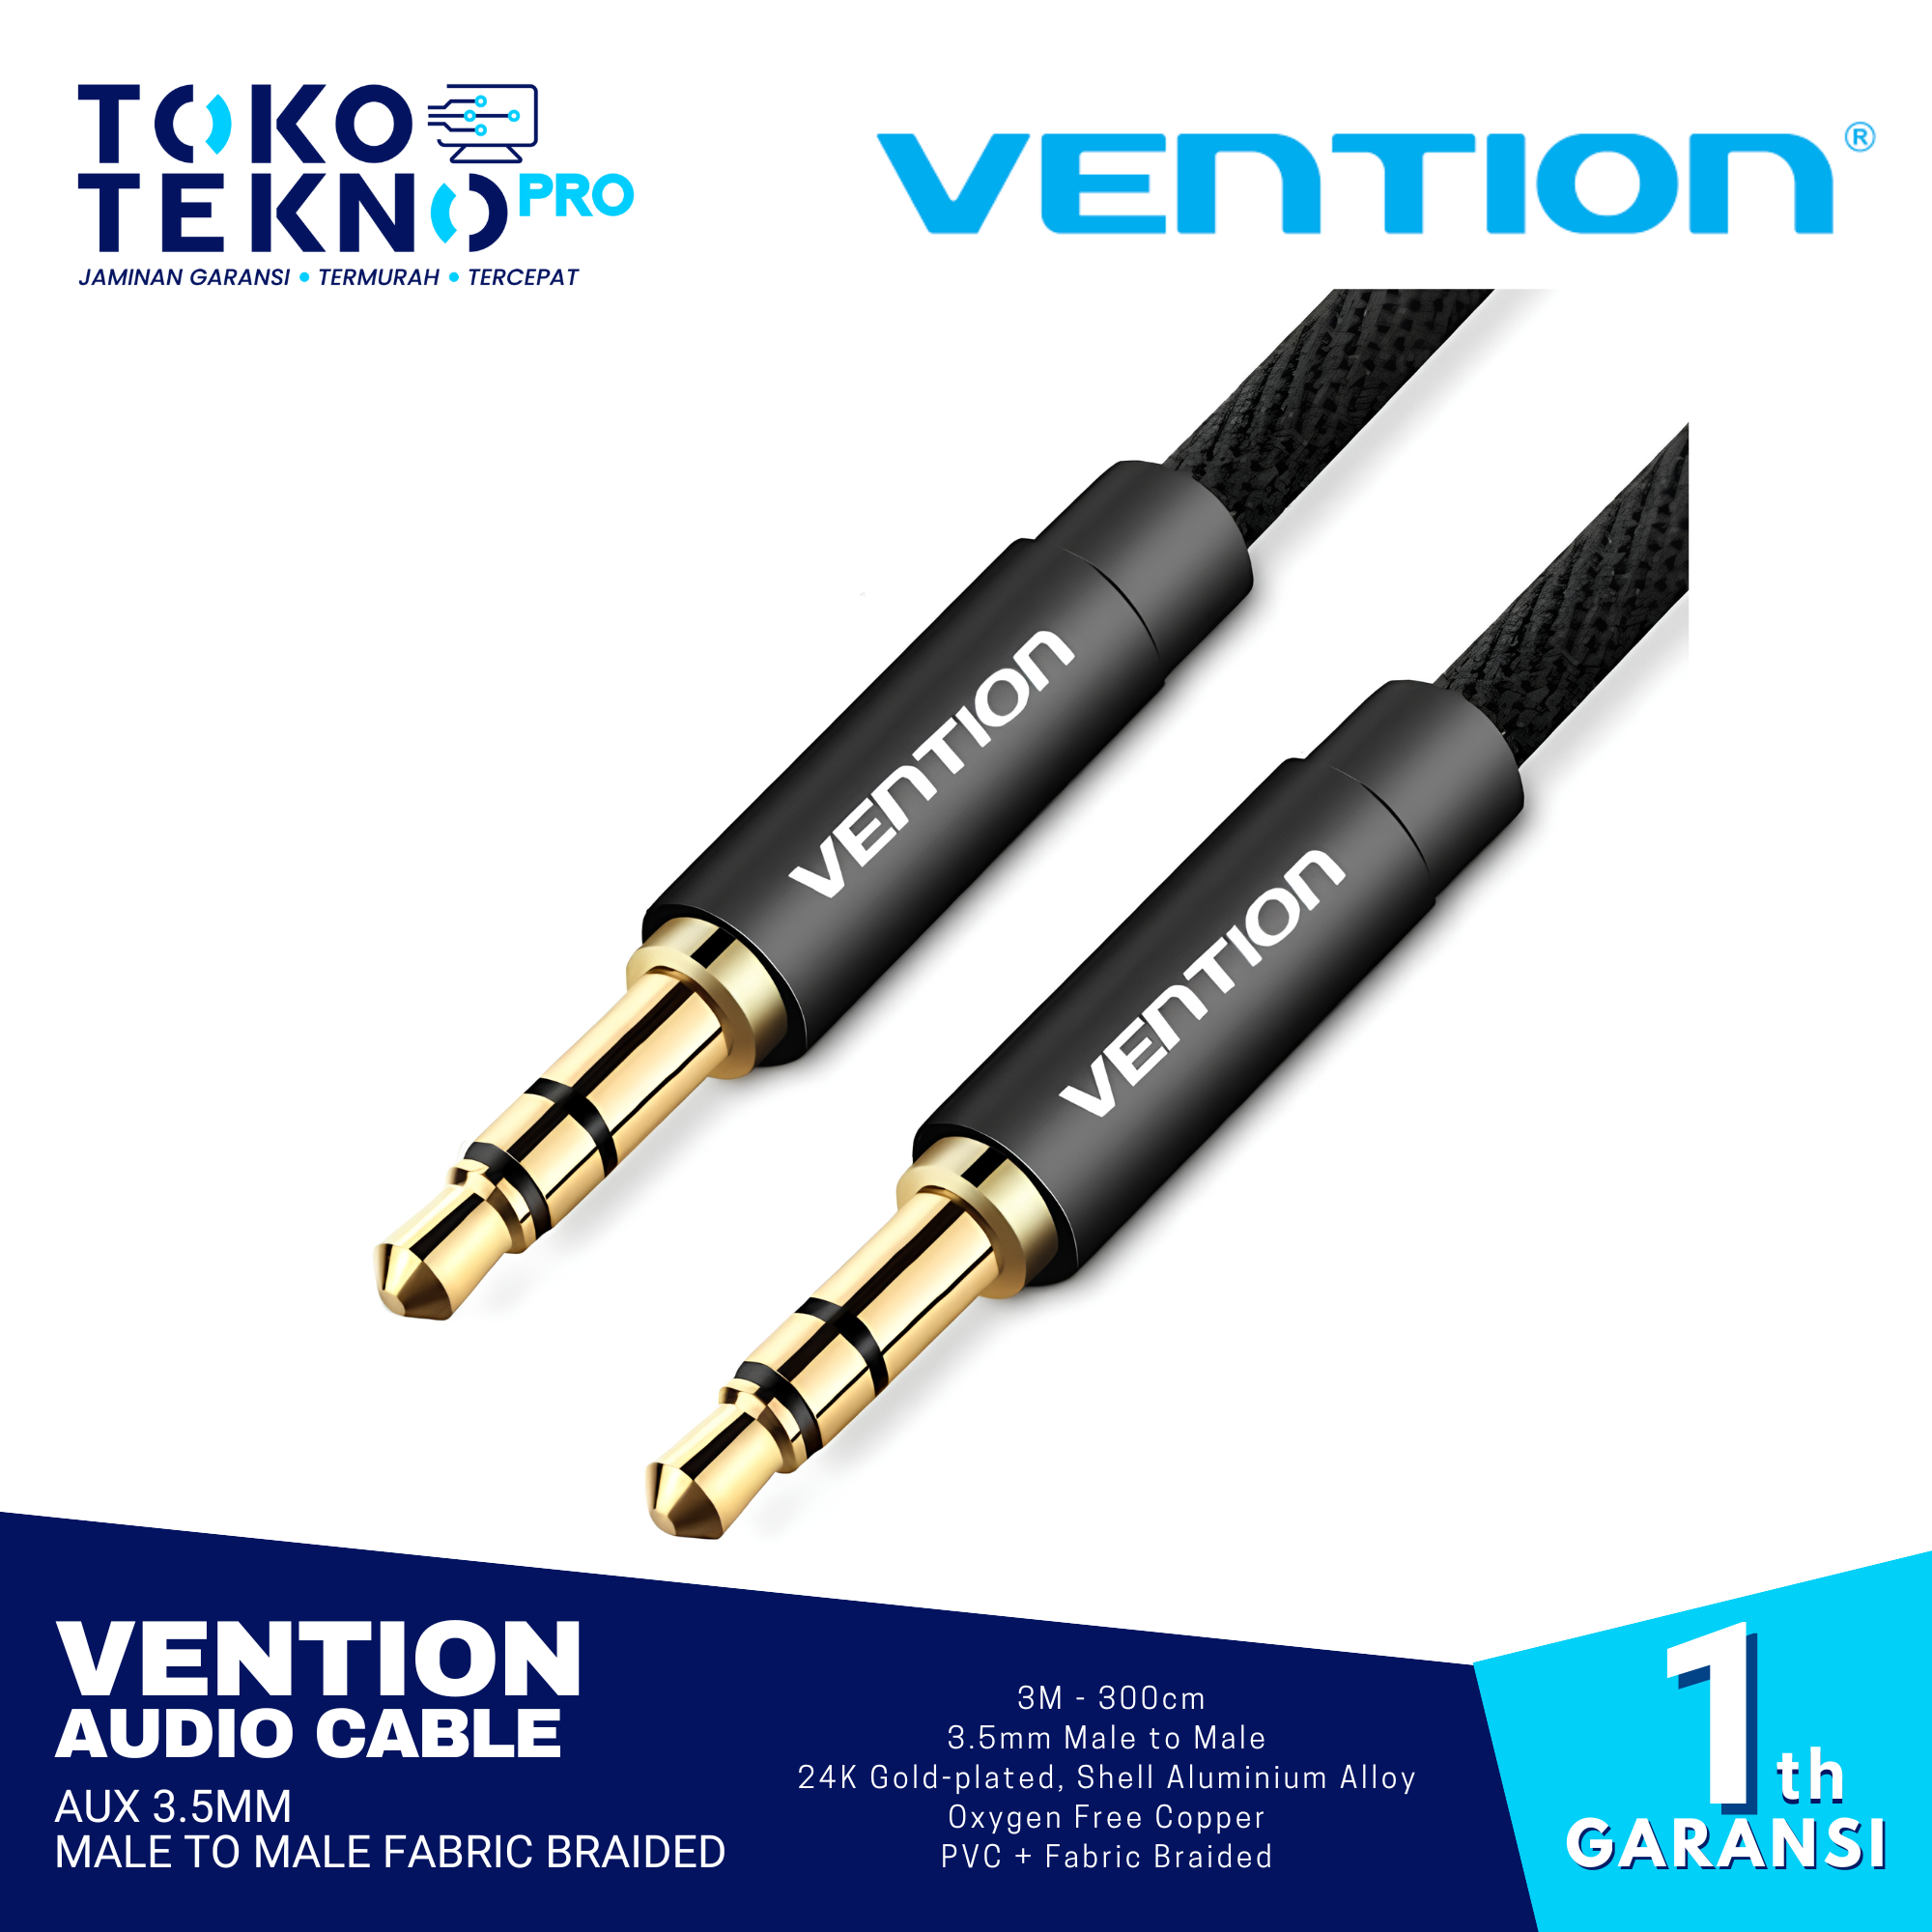 Vention Audio Cable Kabel Aux 3.5mm Male to Male Fabric Braided